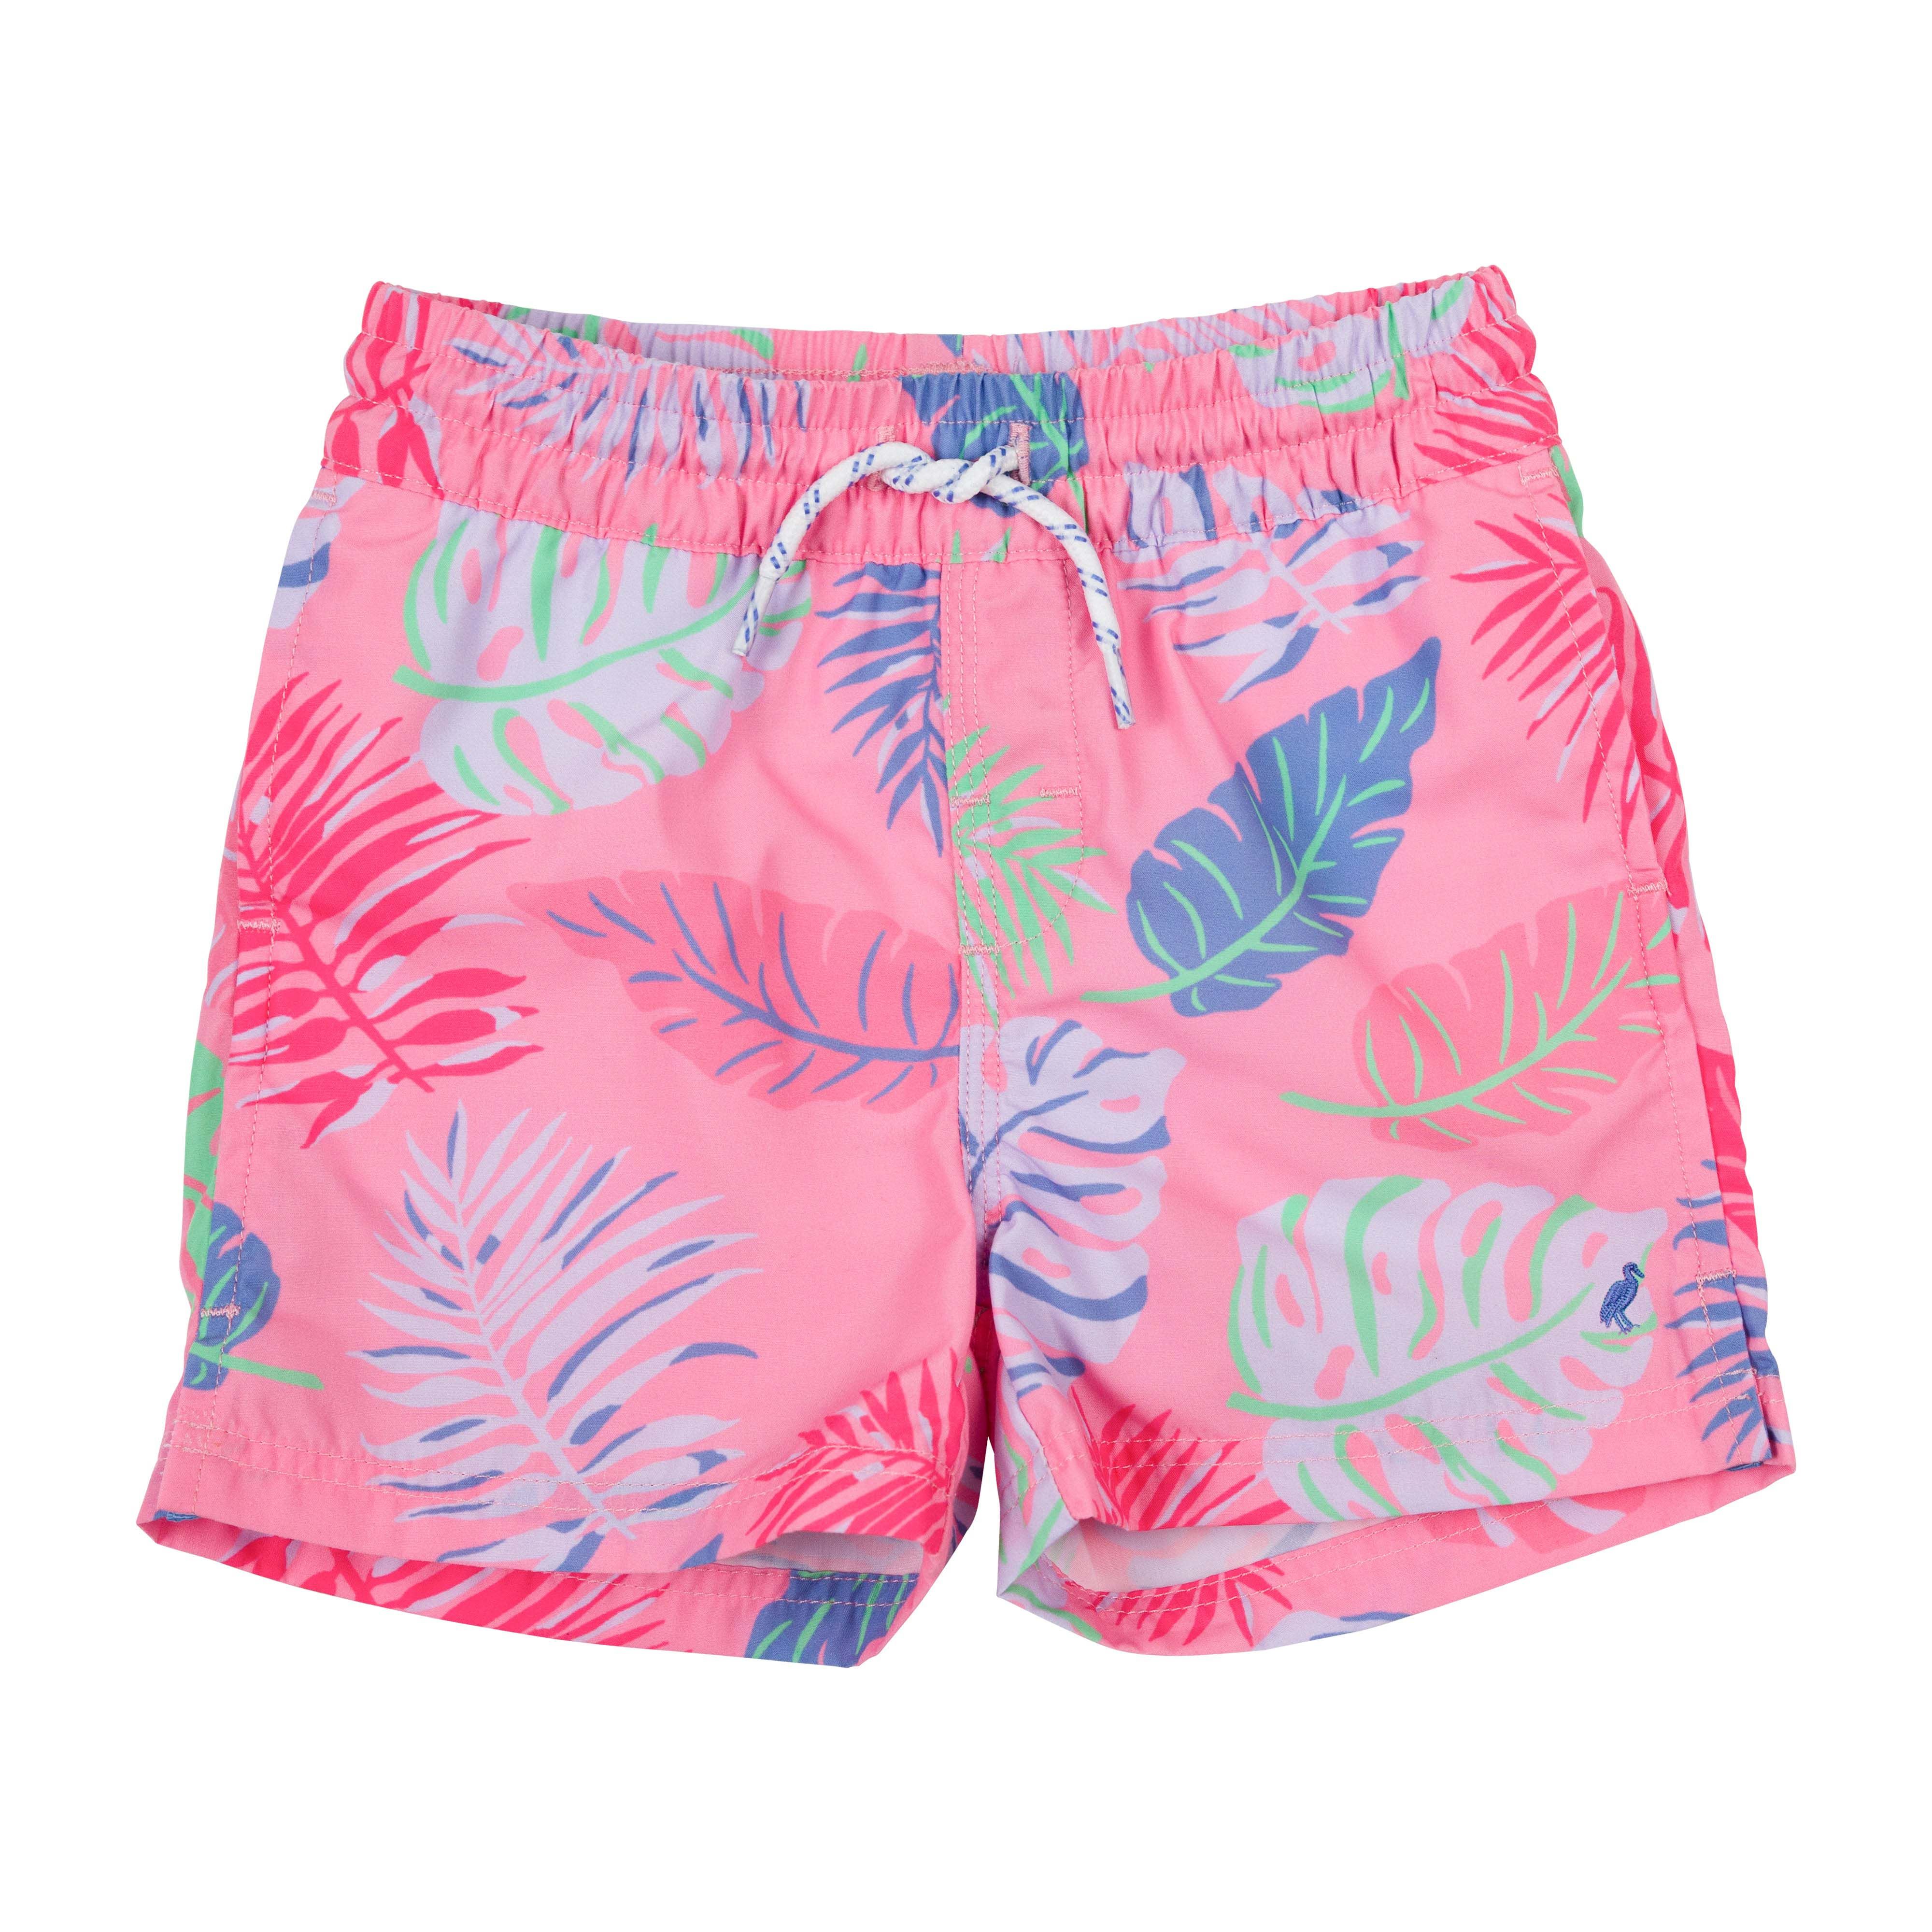 Tortola Trunks - Caicos Canopy with Park City Periwinkle Stork | The Beaufort Bonnet Company